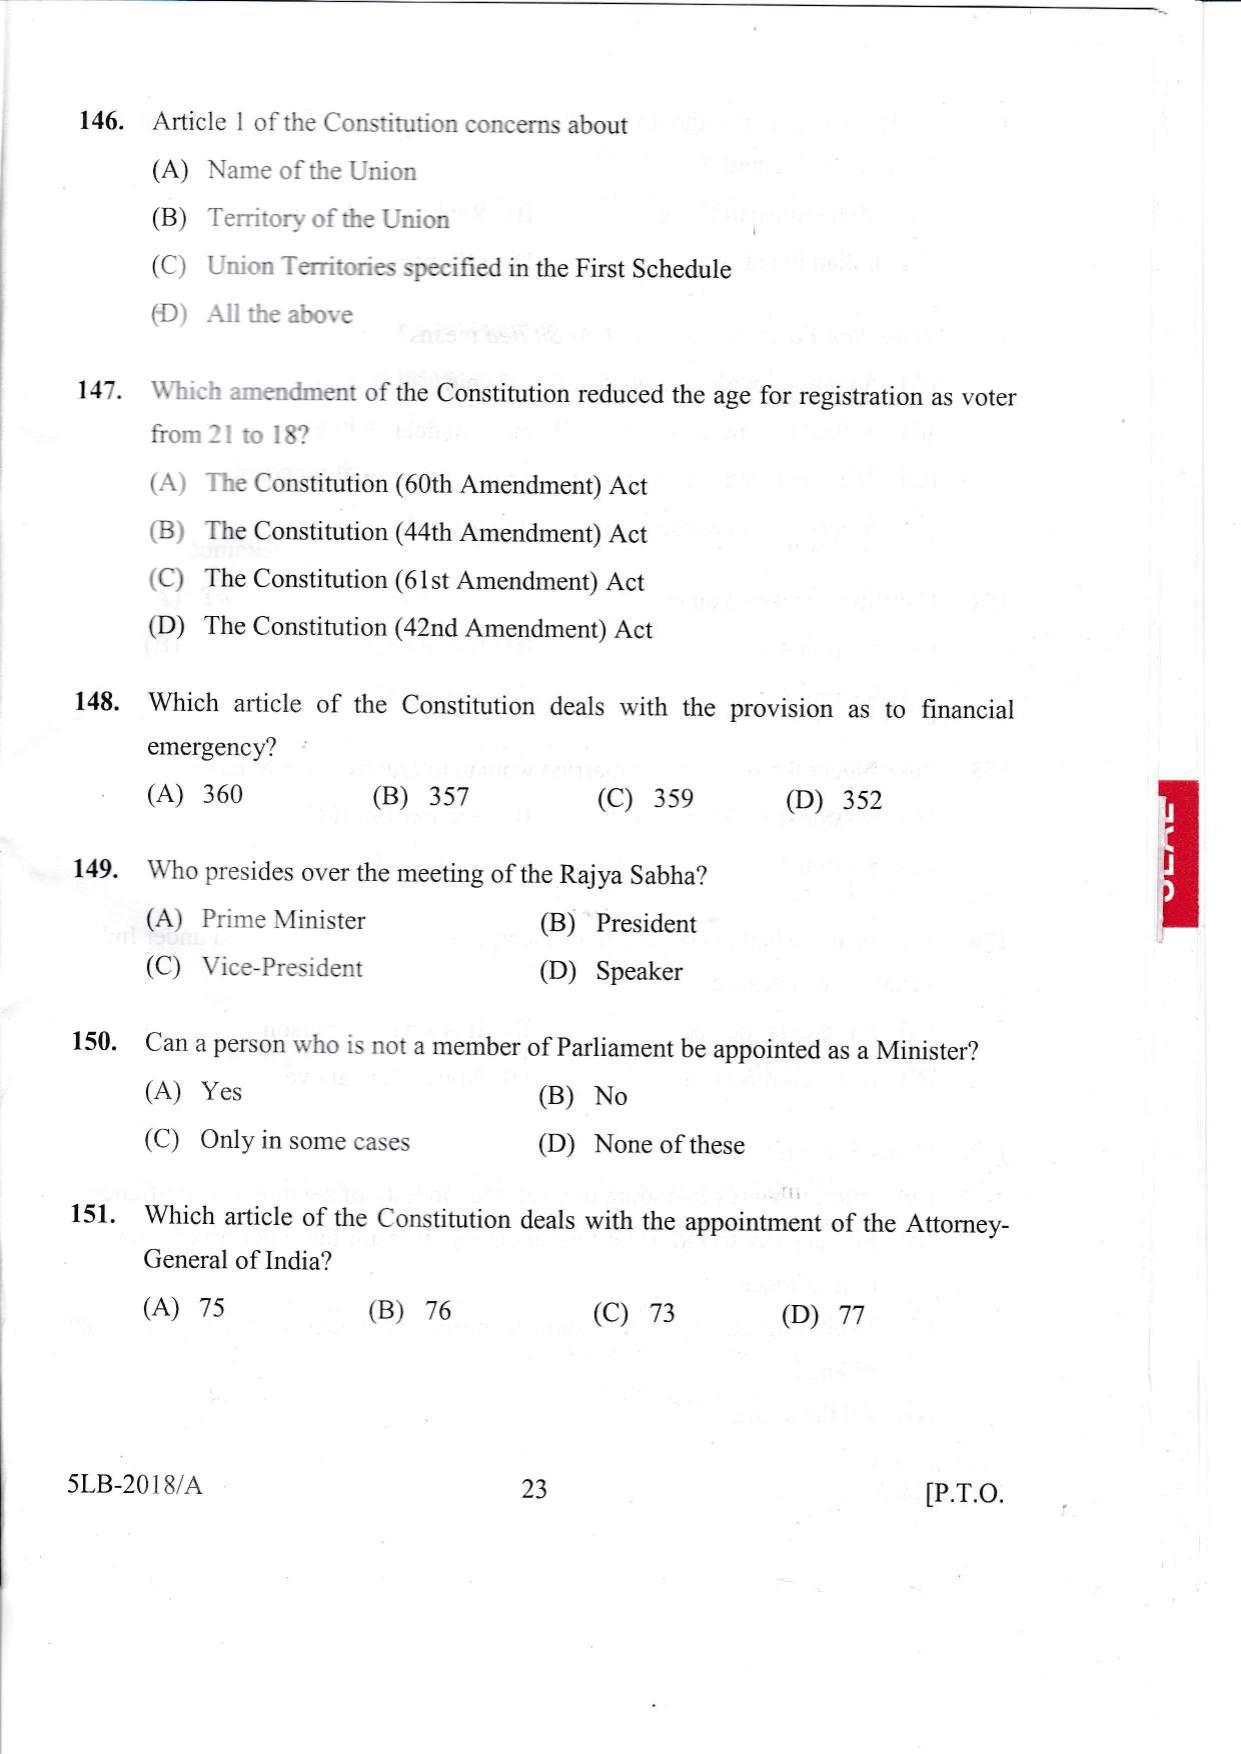 KLEE 5 Year LLB Exam 2018 Question Paper - Page 23